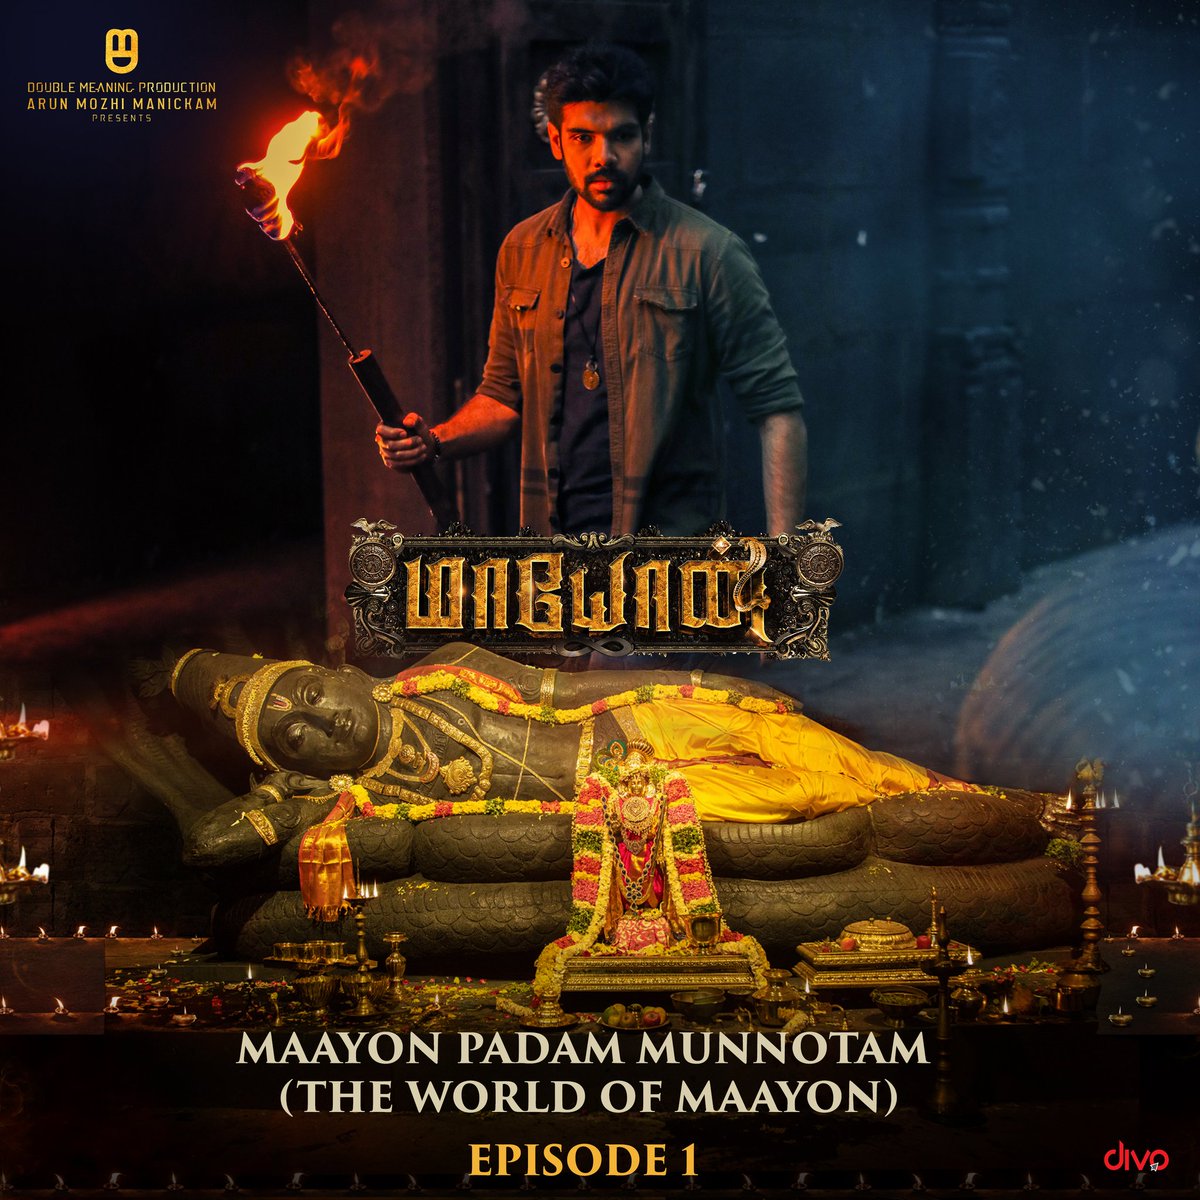 Listen to #Maayon Padam Munnotam The World of Maayon - Episode 1 on your favorite streaming platforms 🎧 Apple Music - apple.co/3Qyanfg iTunes - apple.co/3Qyanfg Resso - m.resso.com/Zs8F4tqqh/ Amazon Music - amzn.to/45a8Q3O YouTube Music -…